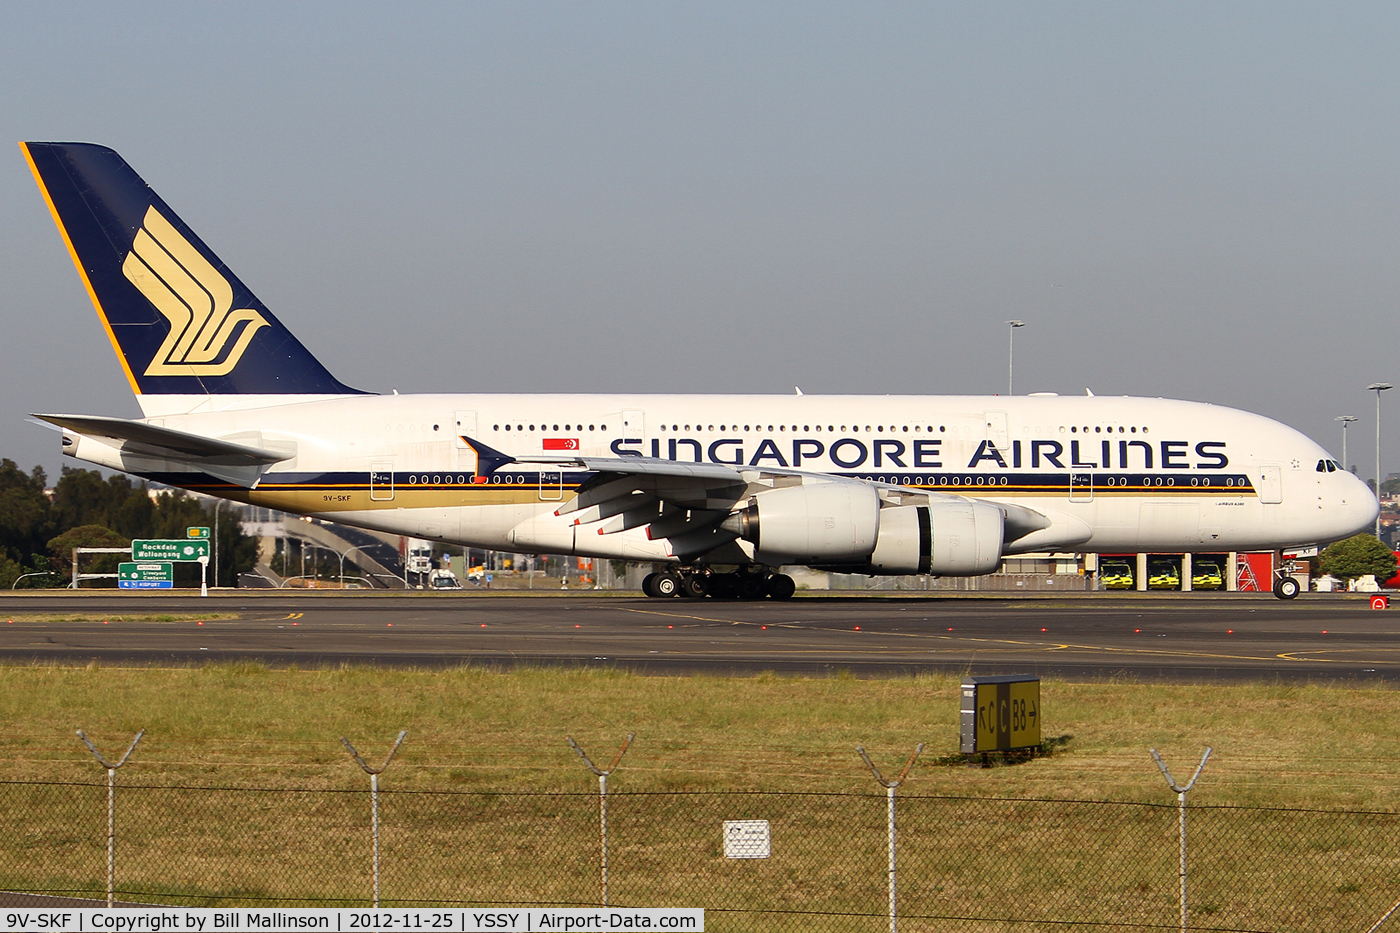 9V-SKF, 2008 Airbus A380-841 C/N 012, taxiing after landing on 34L